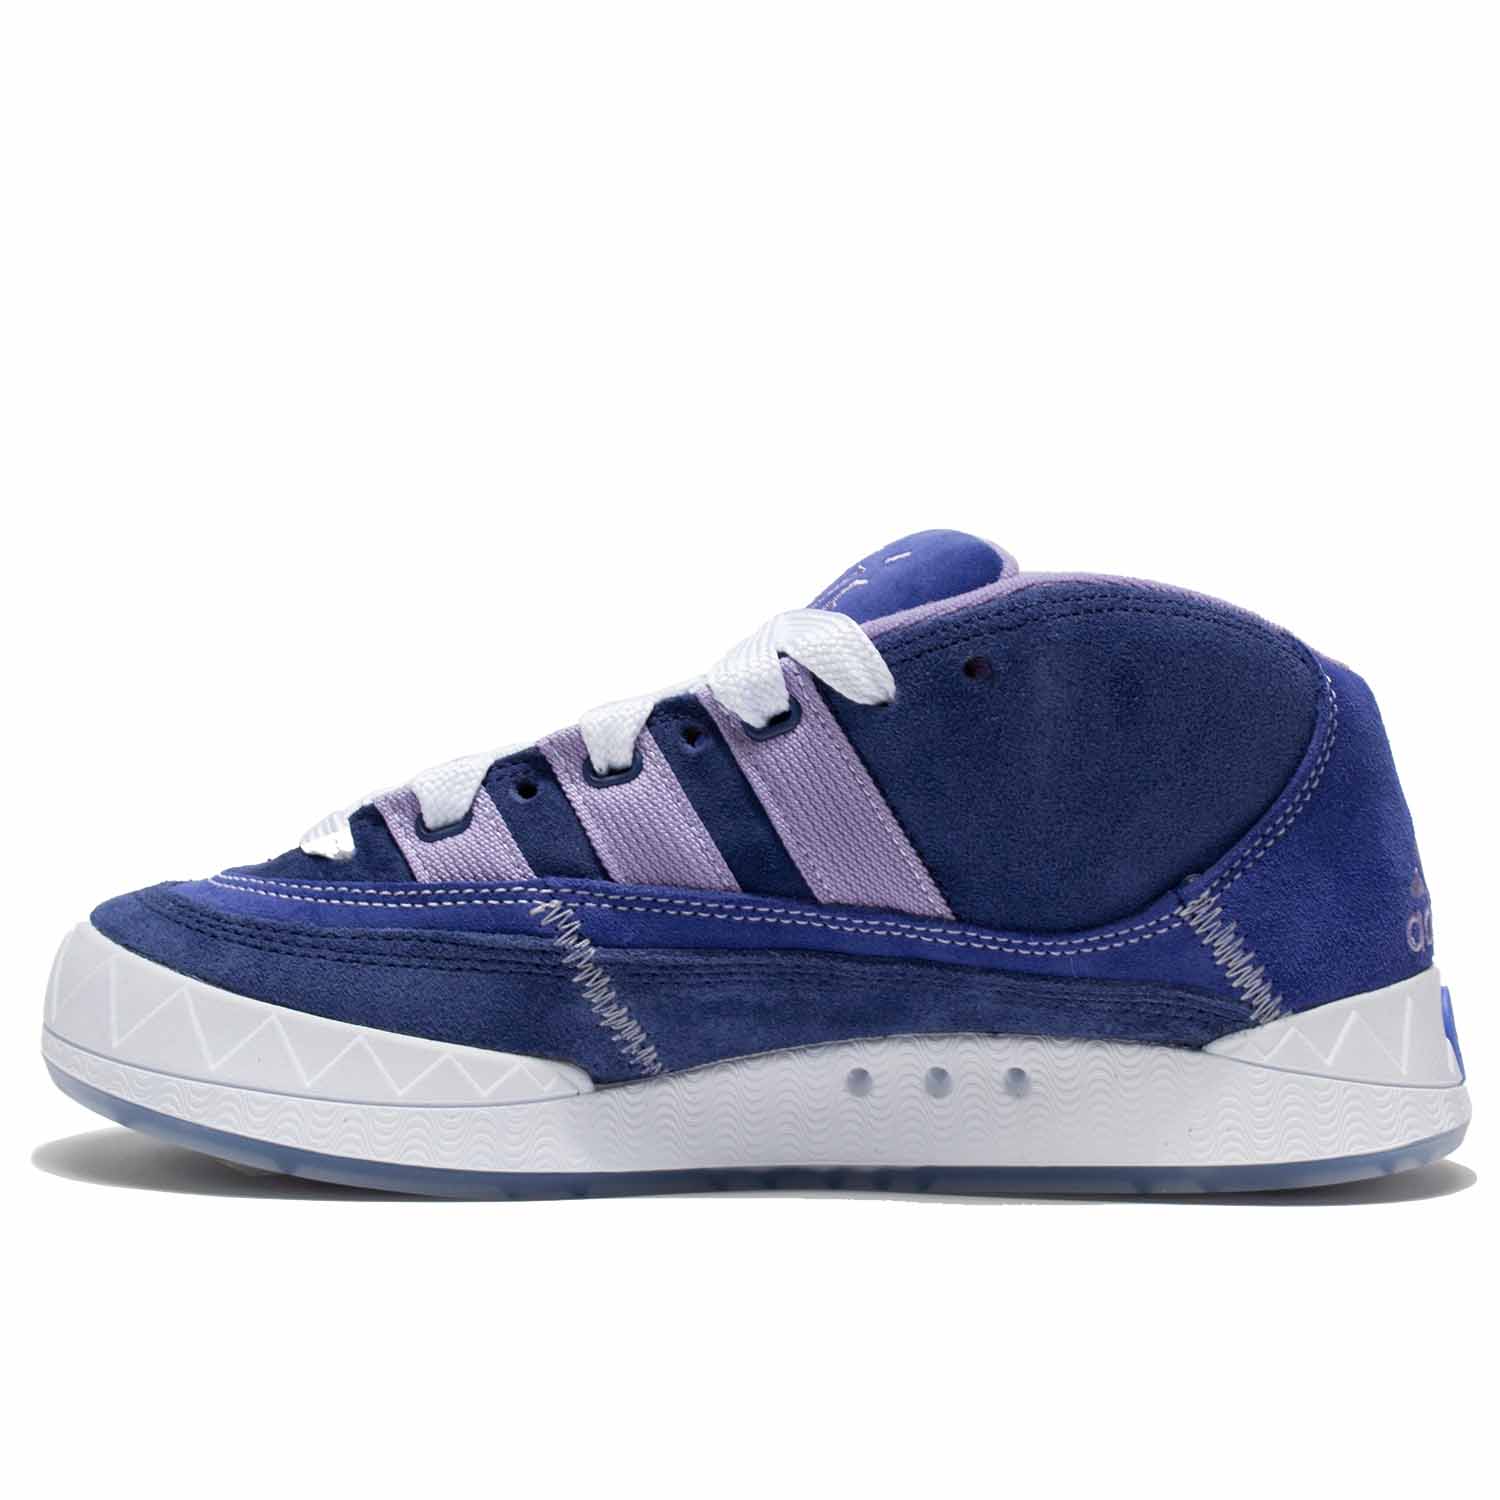 Adidas Adimatic Mid Top x Maite Steenhoudt in Victory Blue color with purple stripes, adidas skateboarding